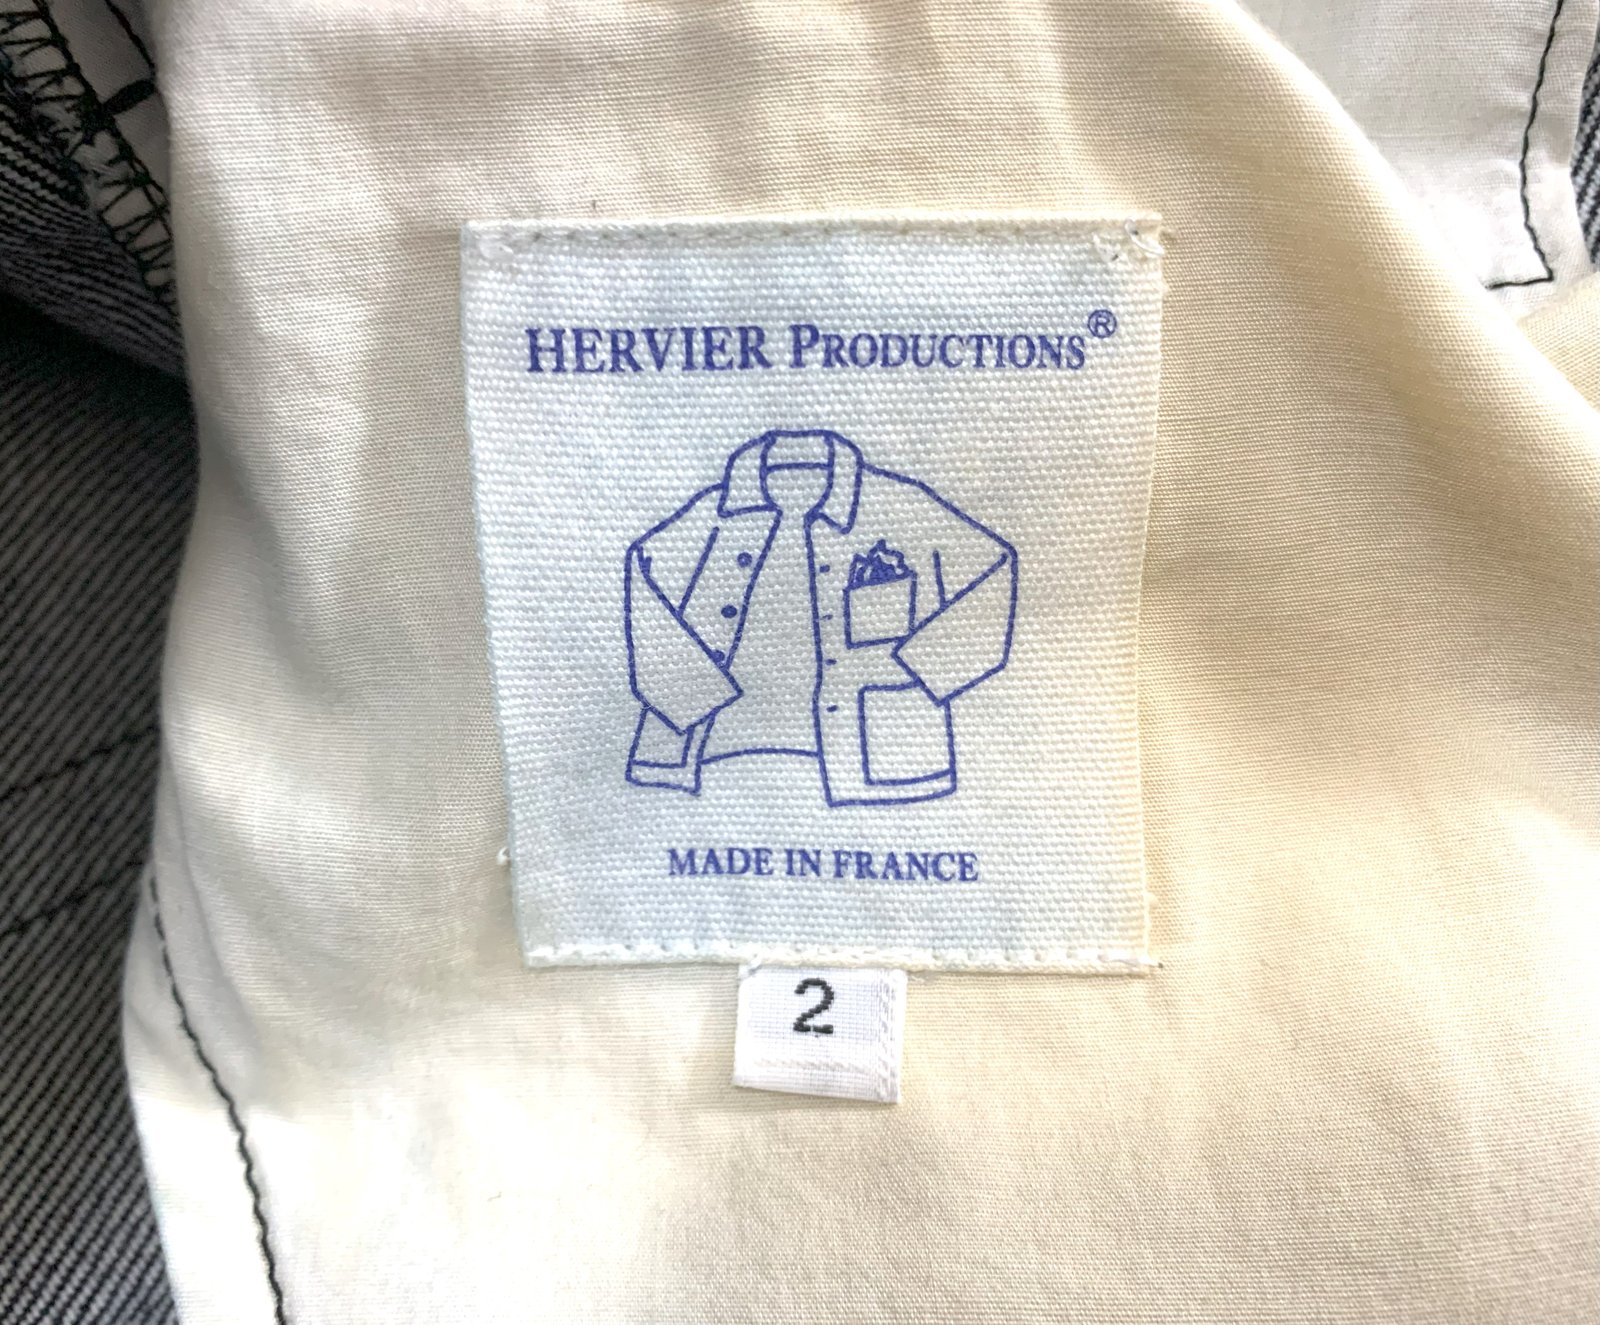 Hervier Productions junya watanabe made in France denim jeans 